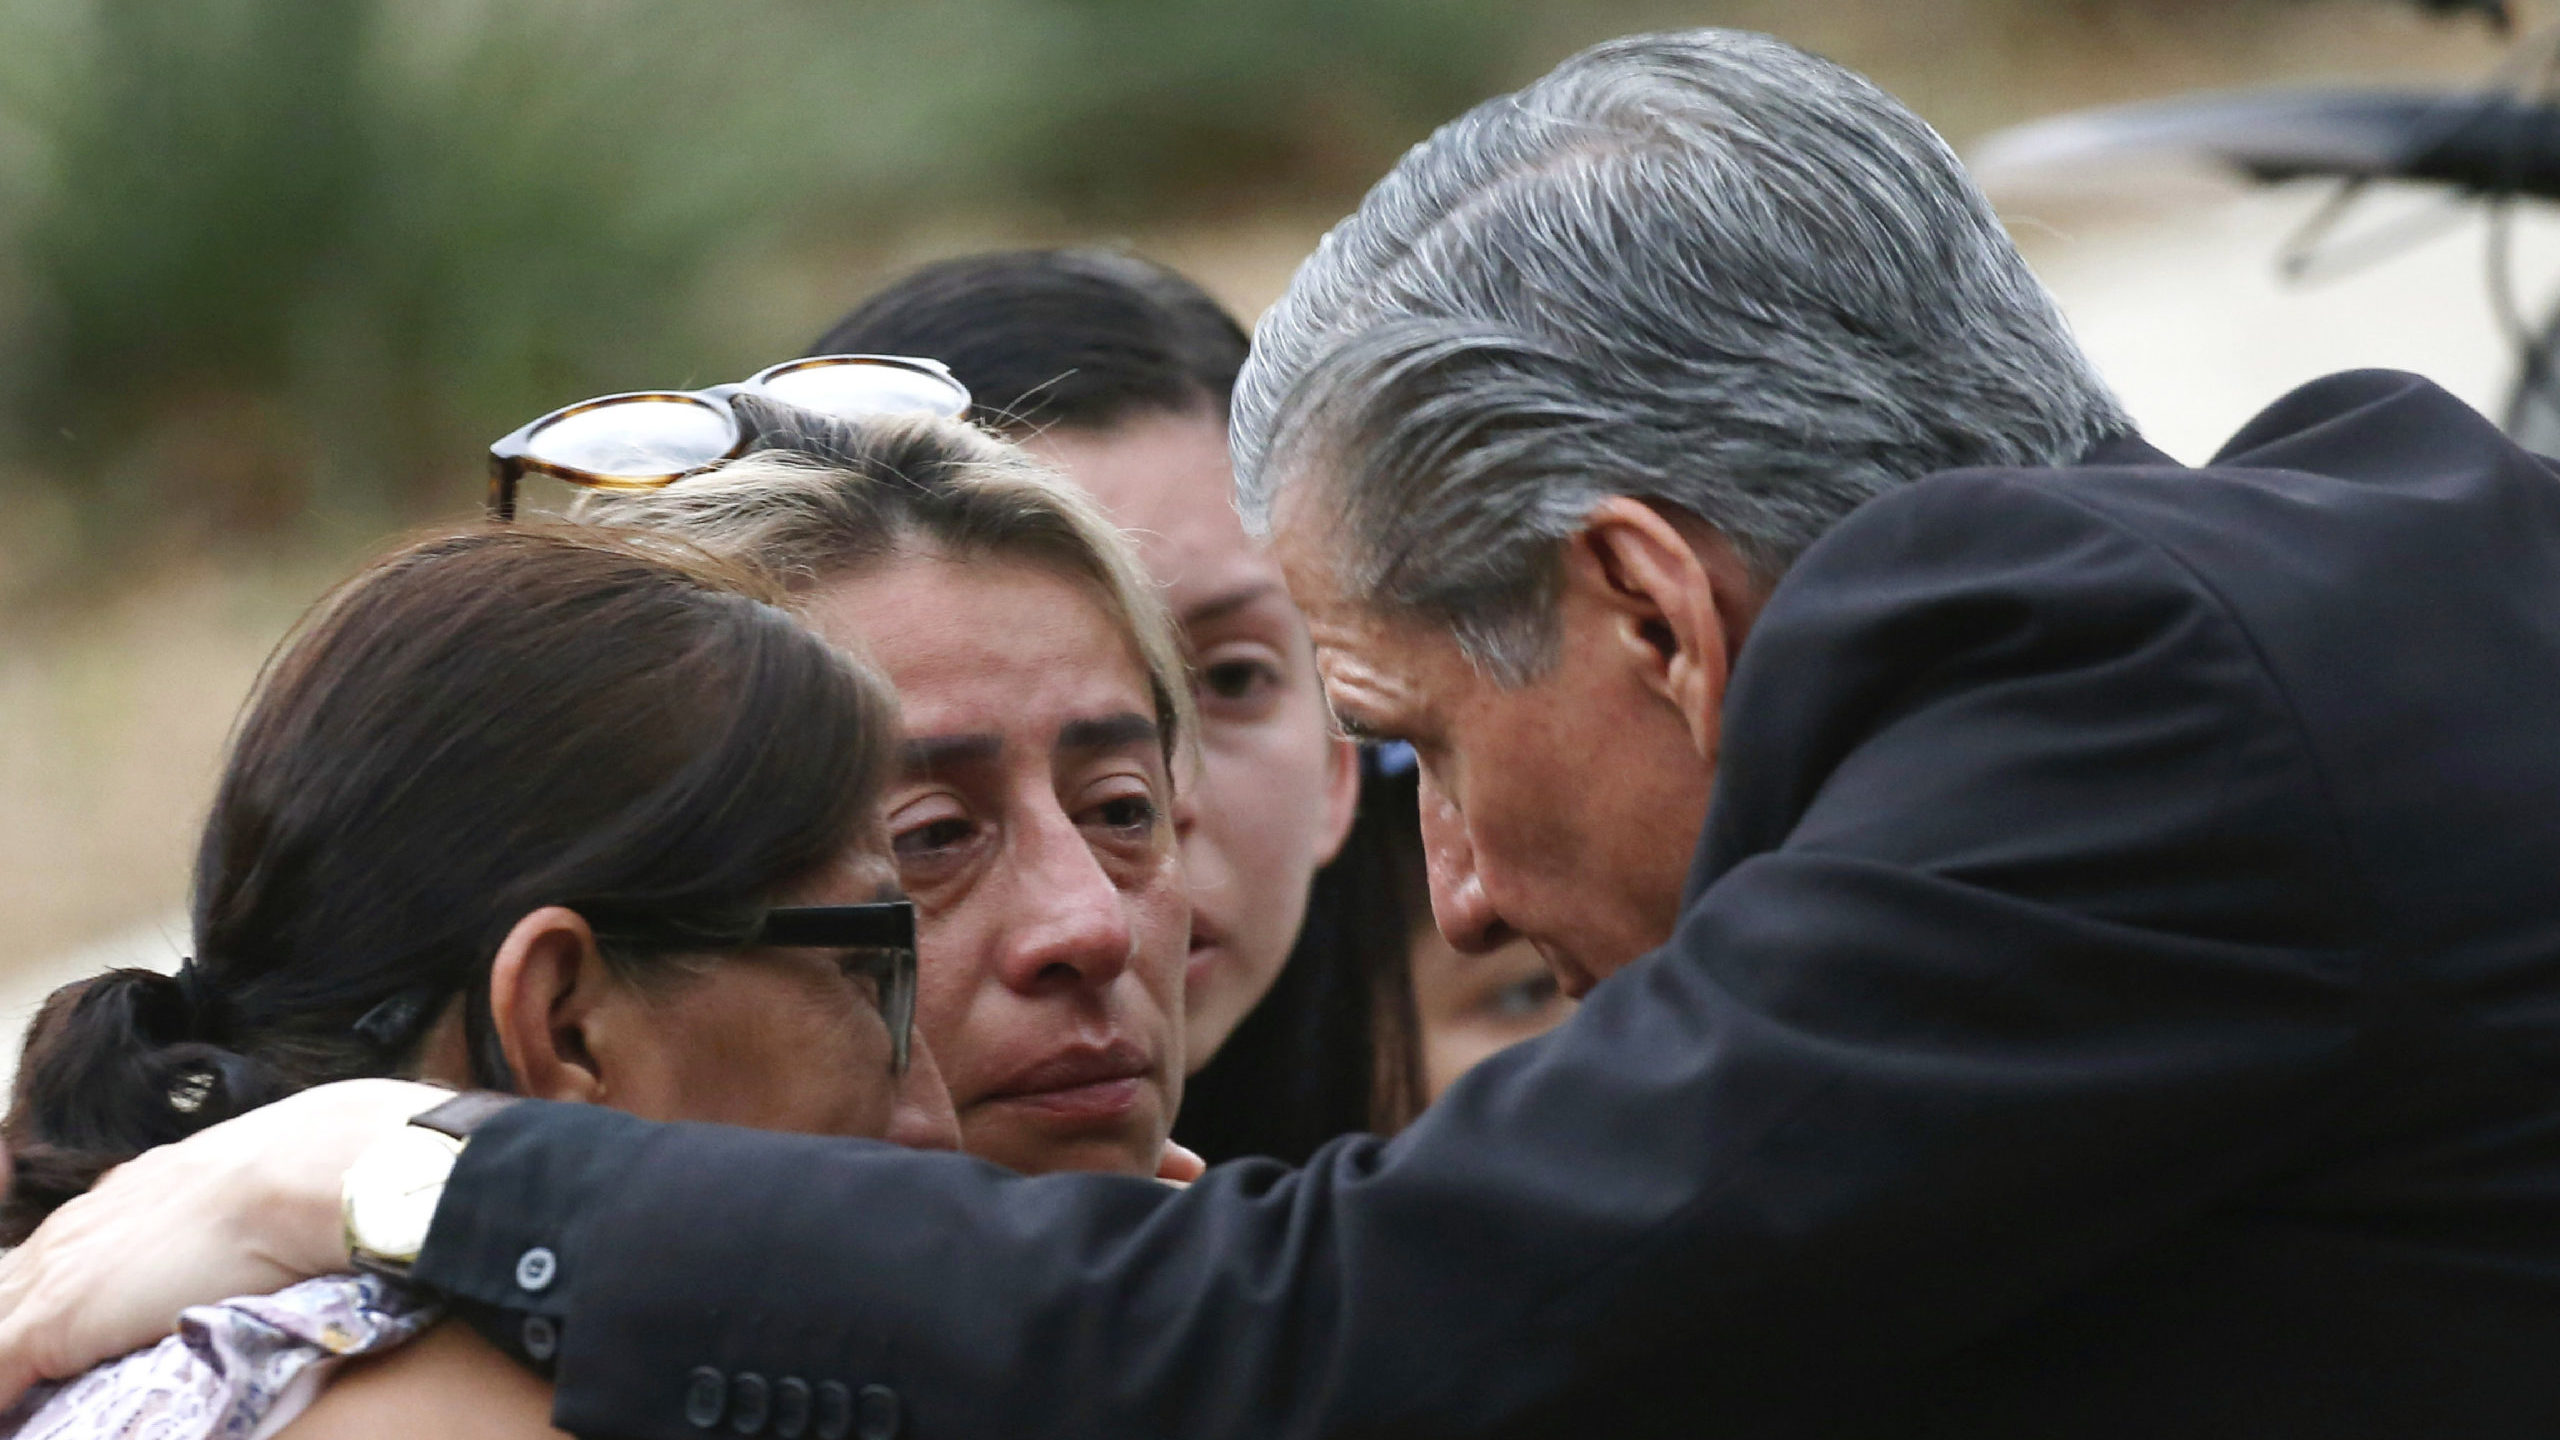 The archbishop of San Antonio, Gustavo Garcia-Siller, comforts families outside the Civic Center fo...